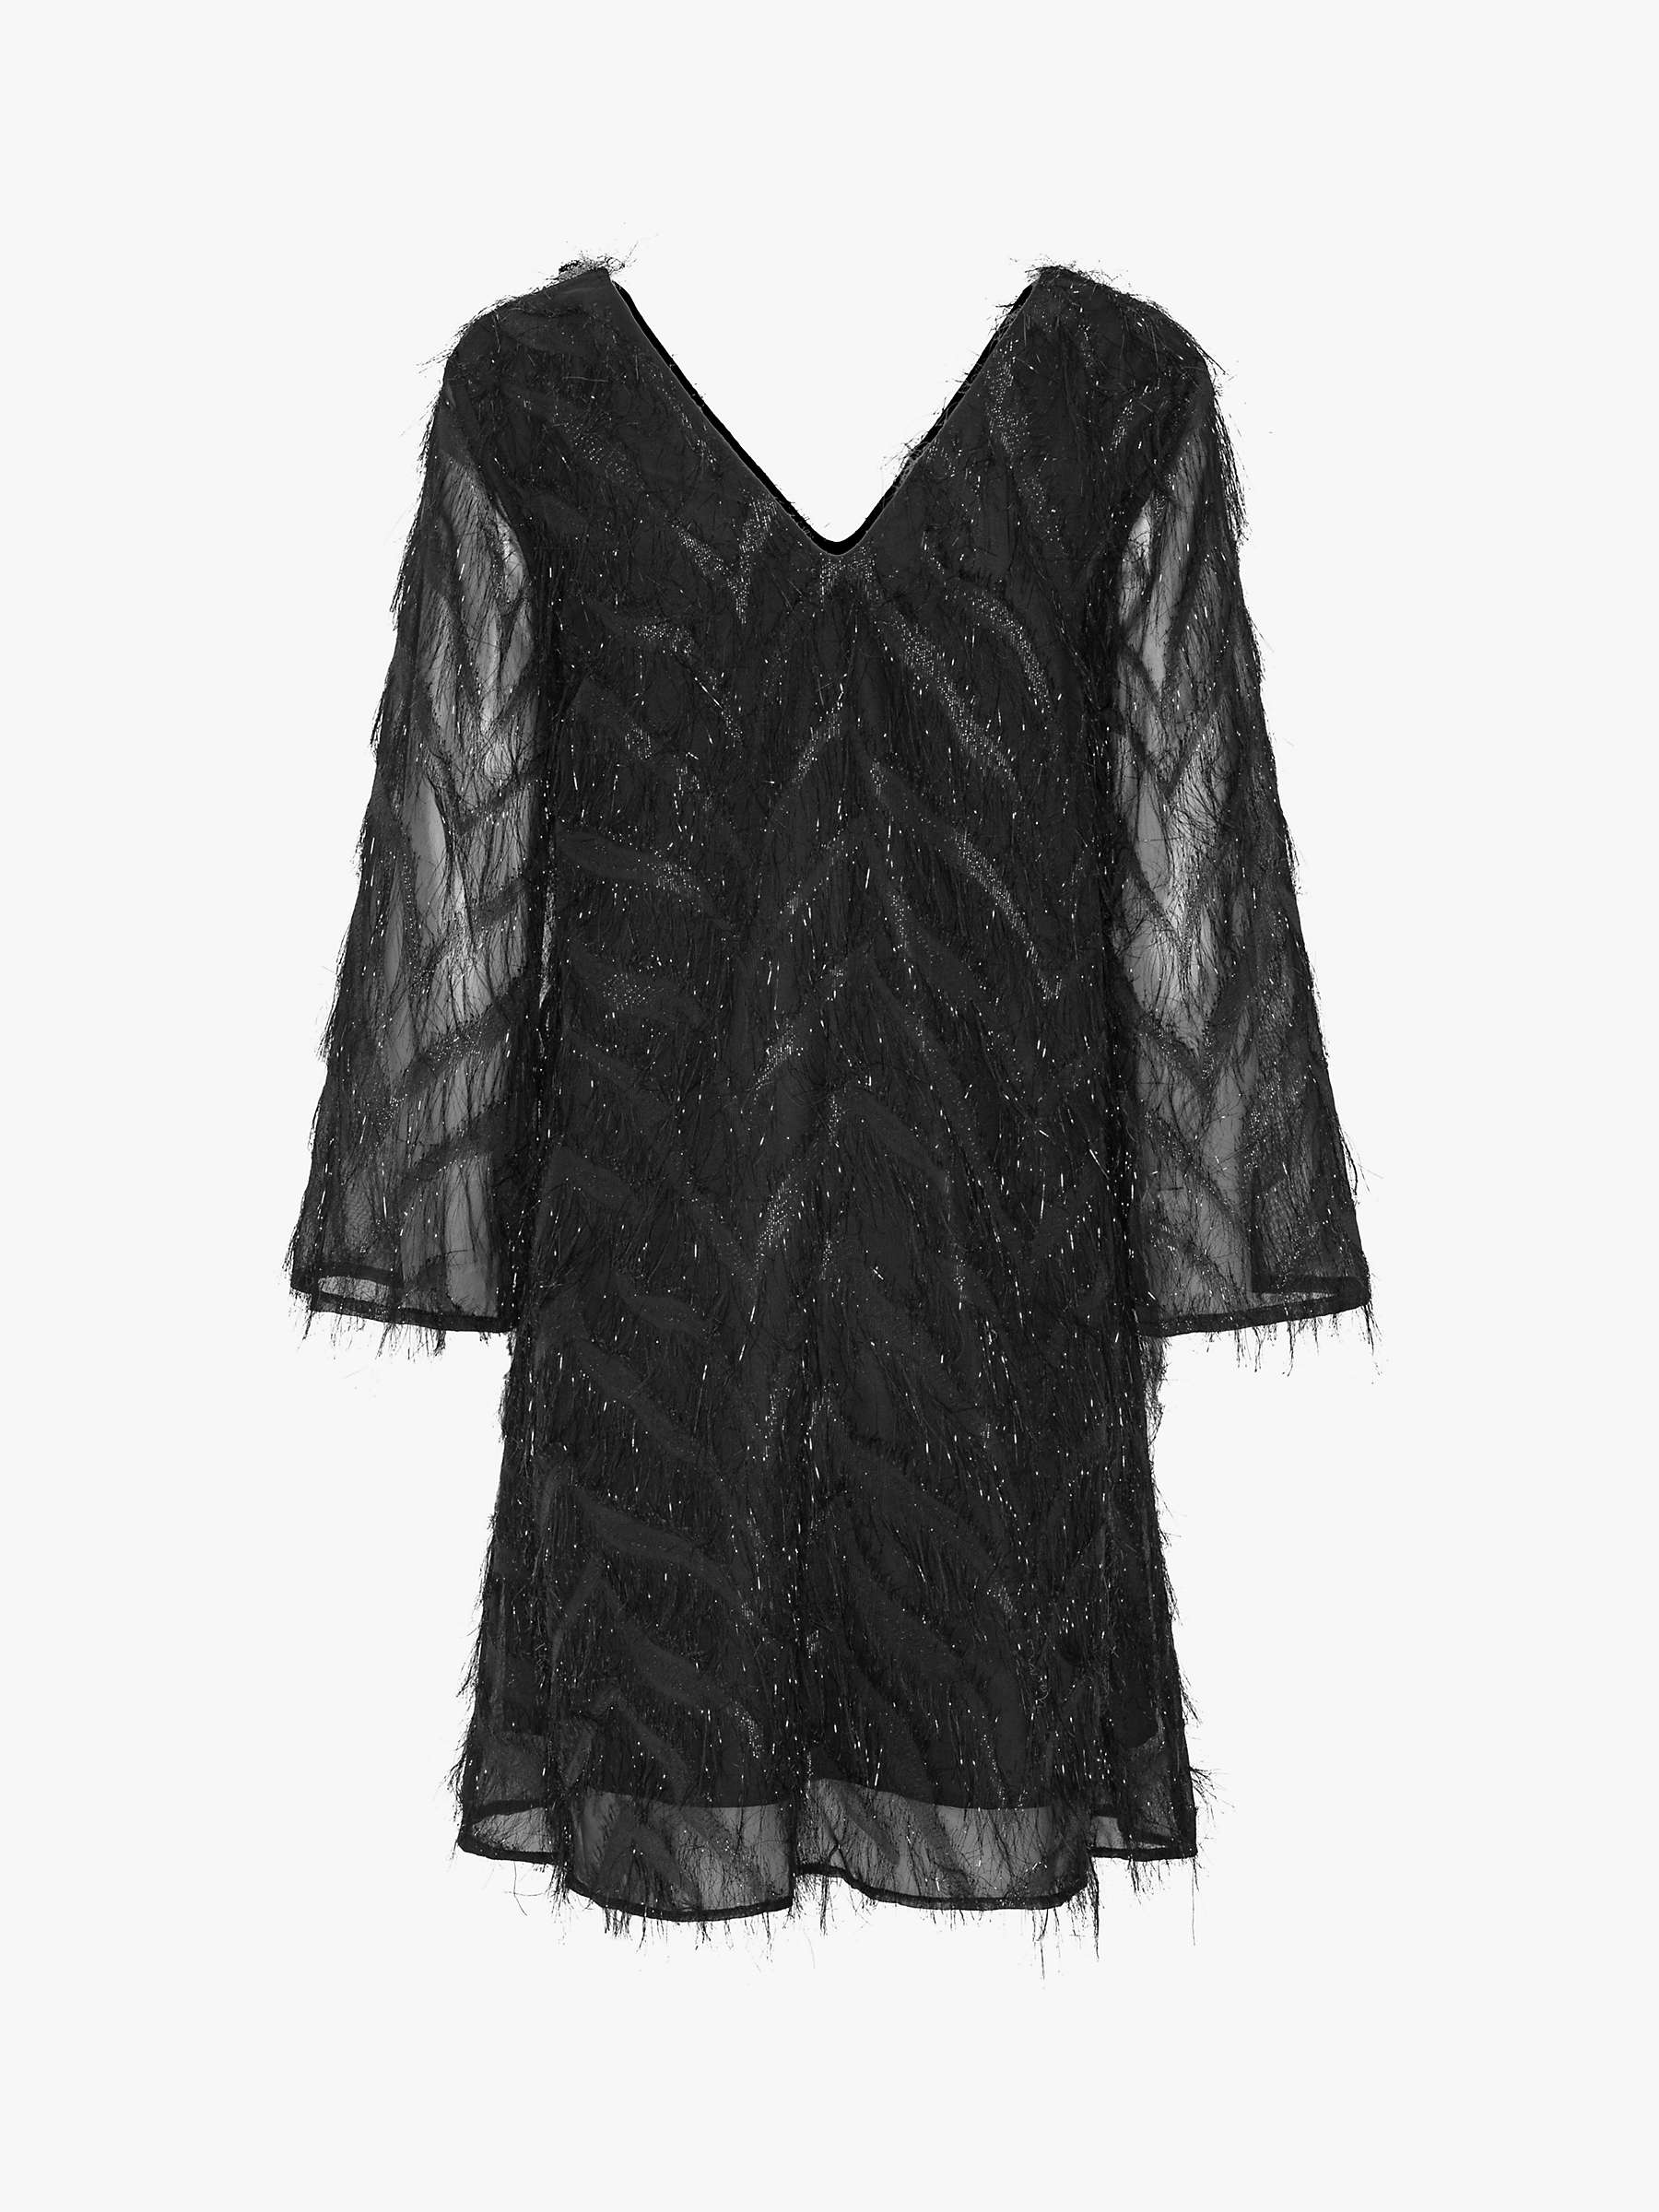 Buy A-VIEW Elina Feather Glitter Mini Dress, Black Online at johnlewis.com